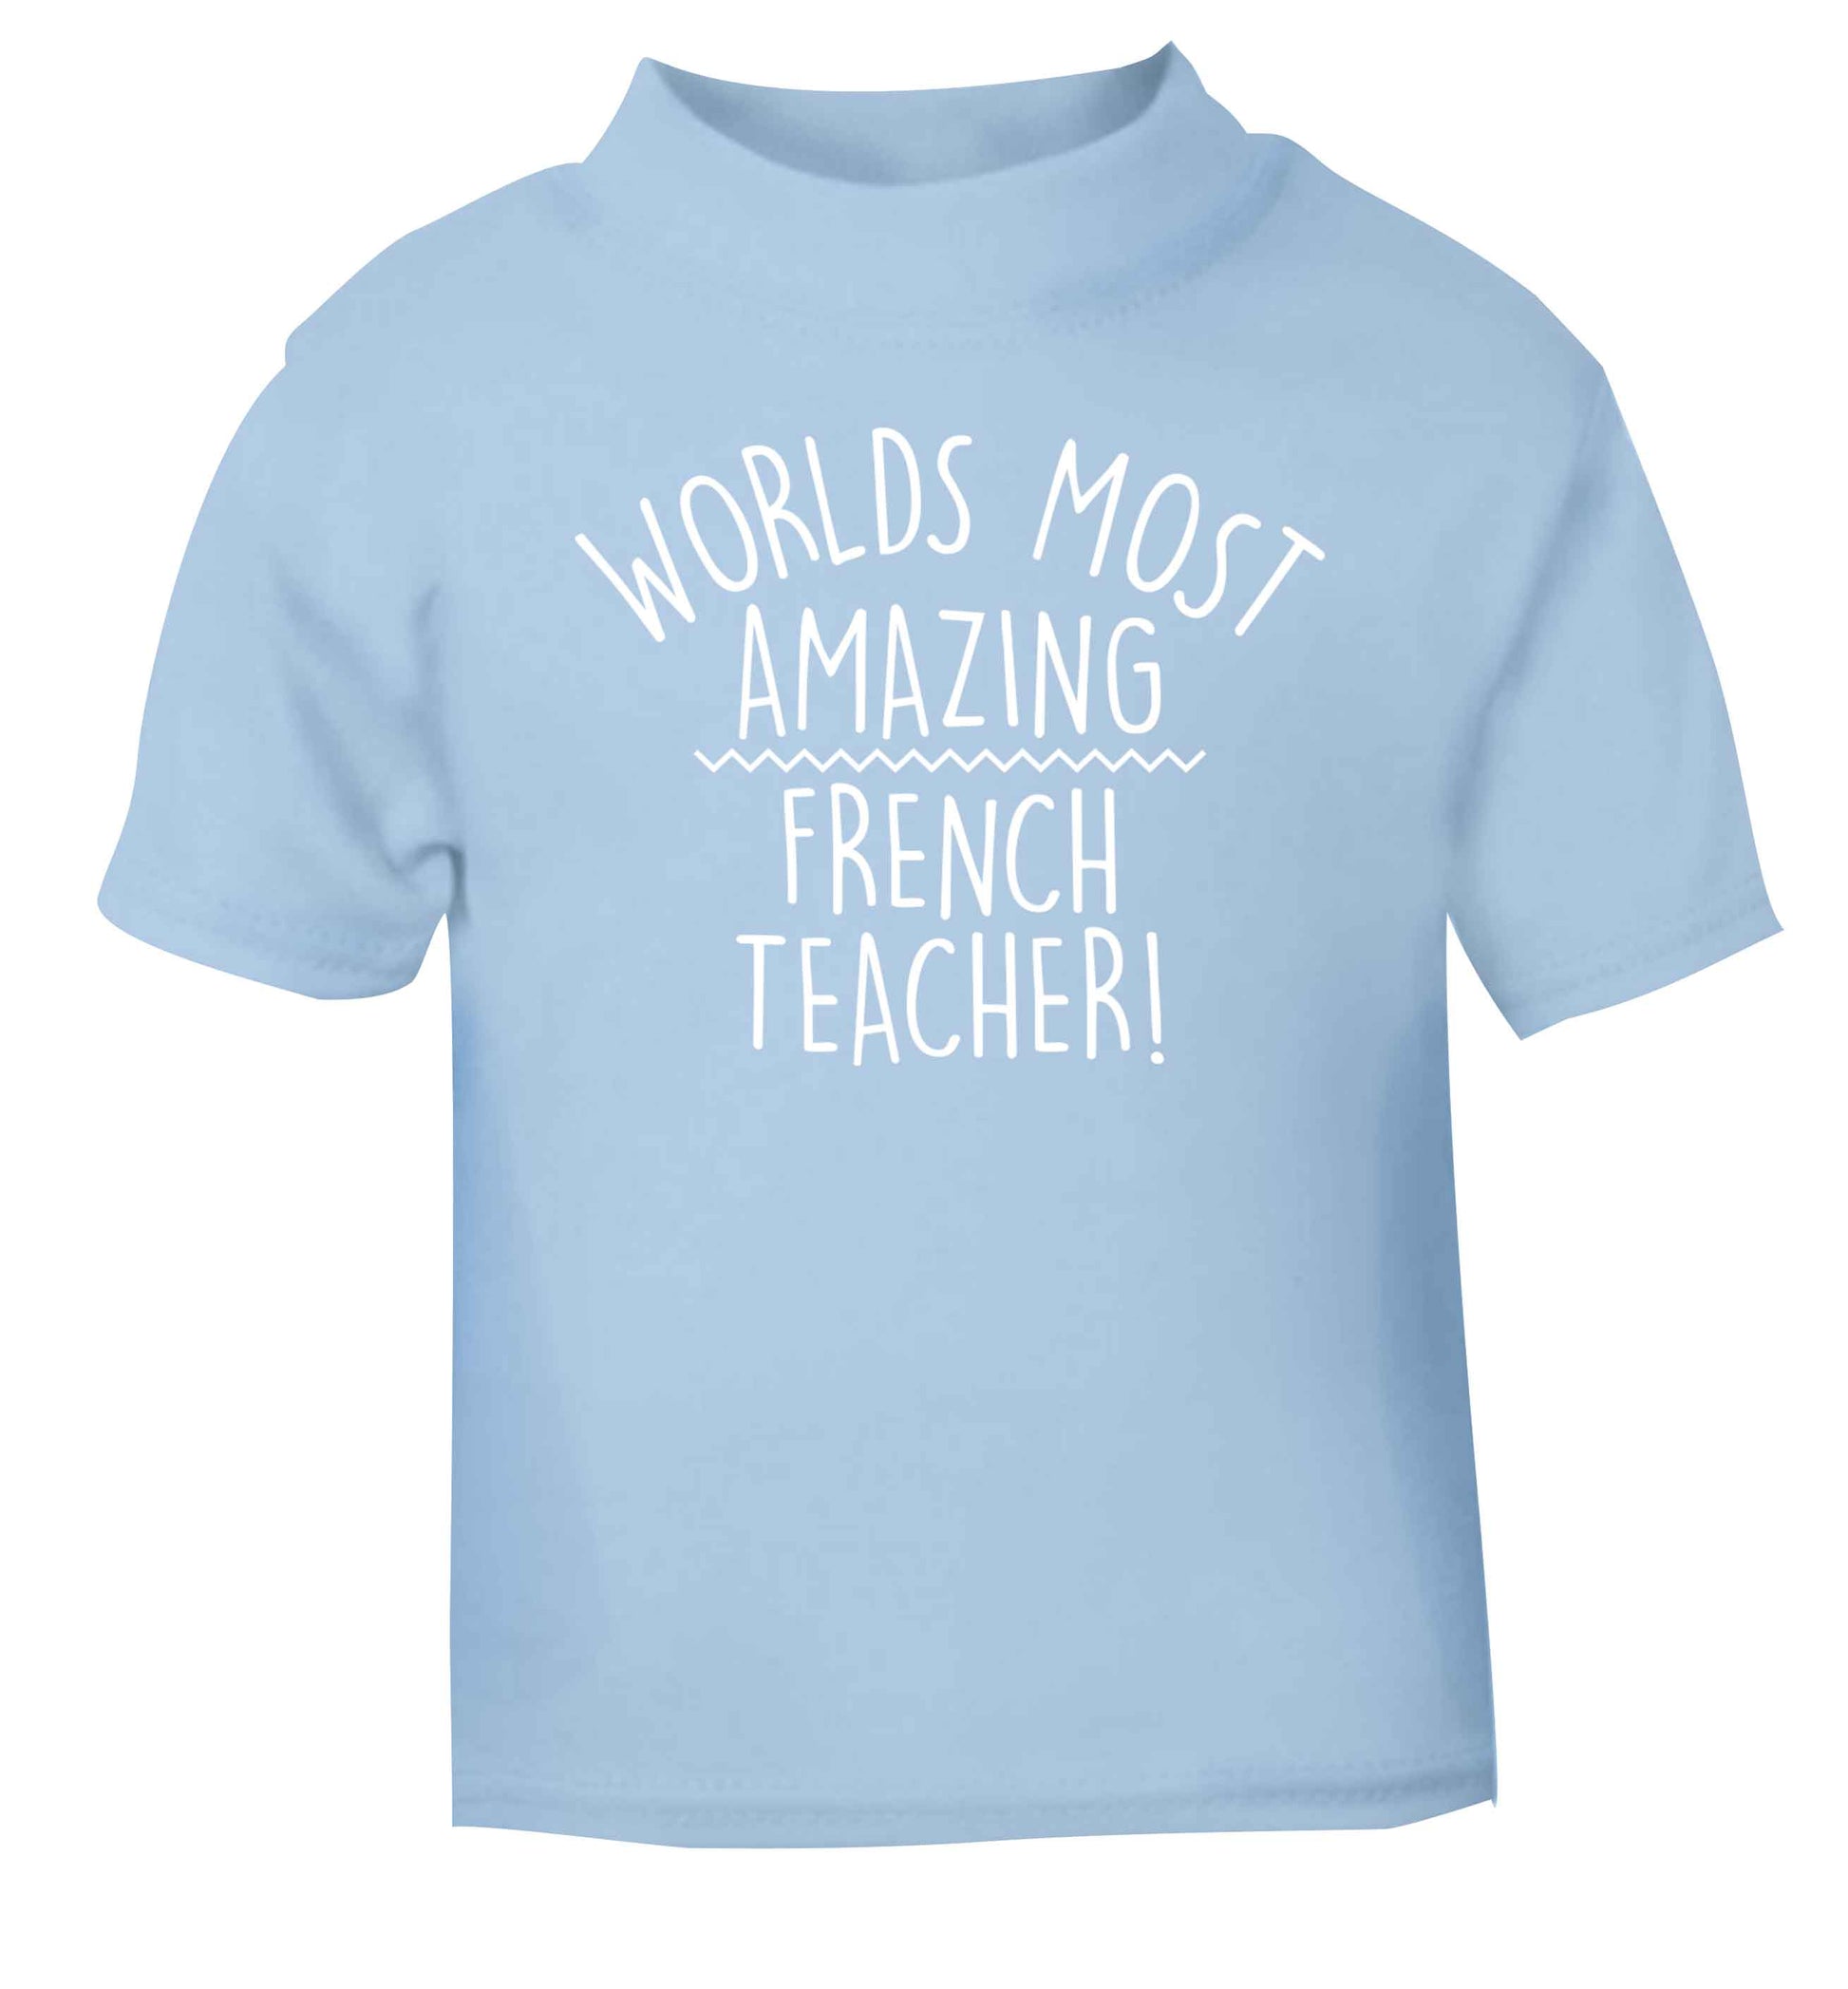 Worlds most amazing French teacher light blue baby toddler Tshirt 2 Years